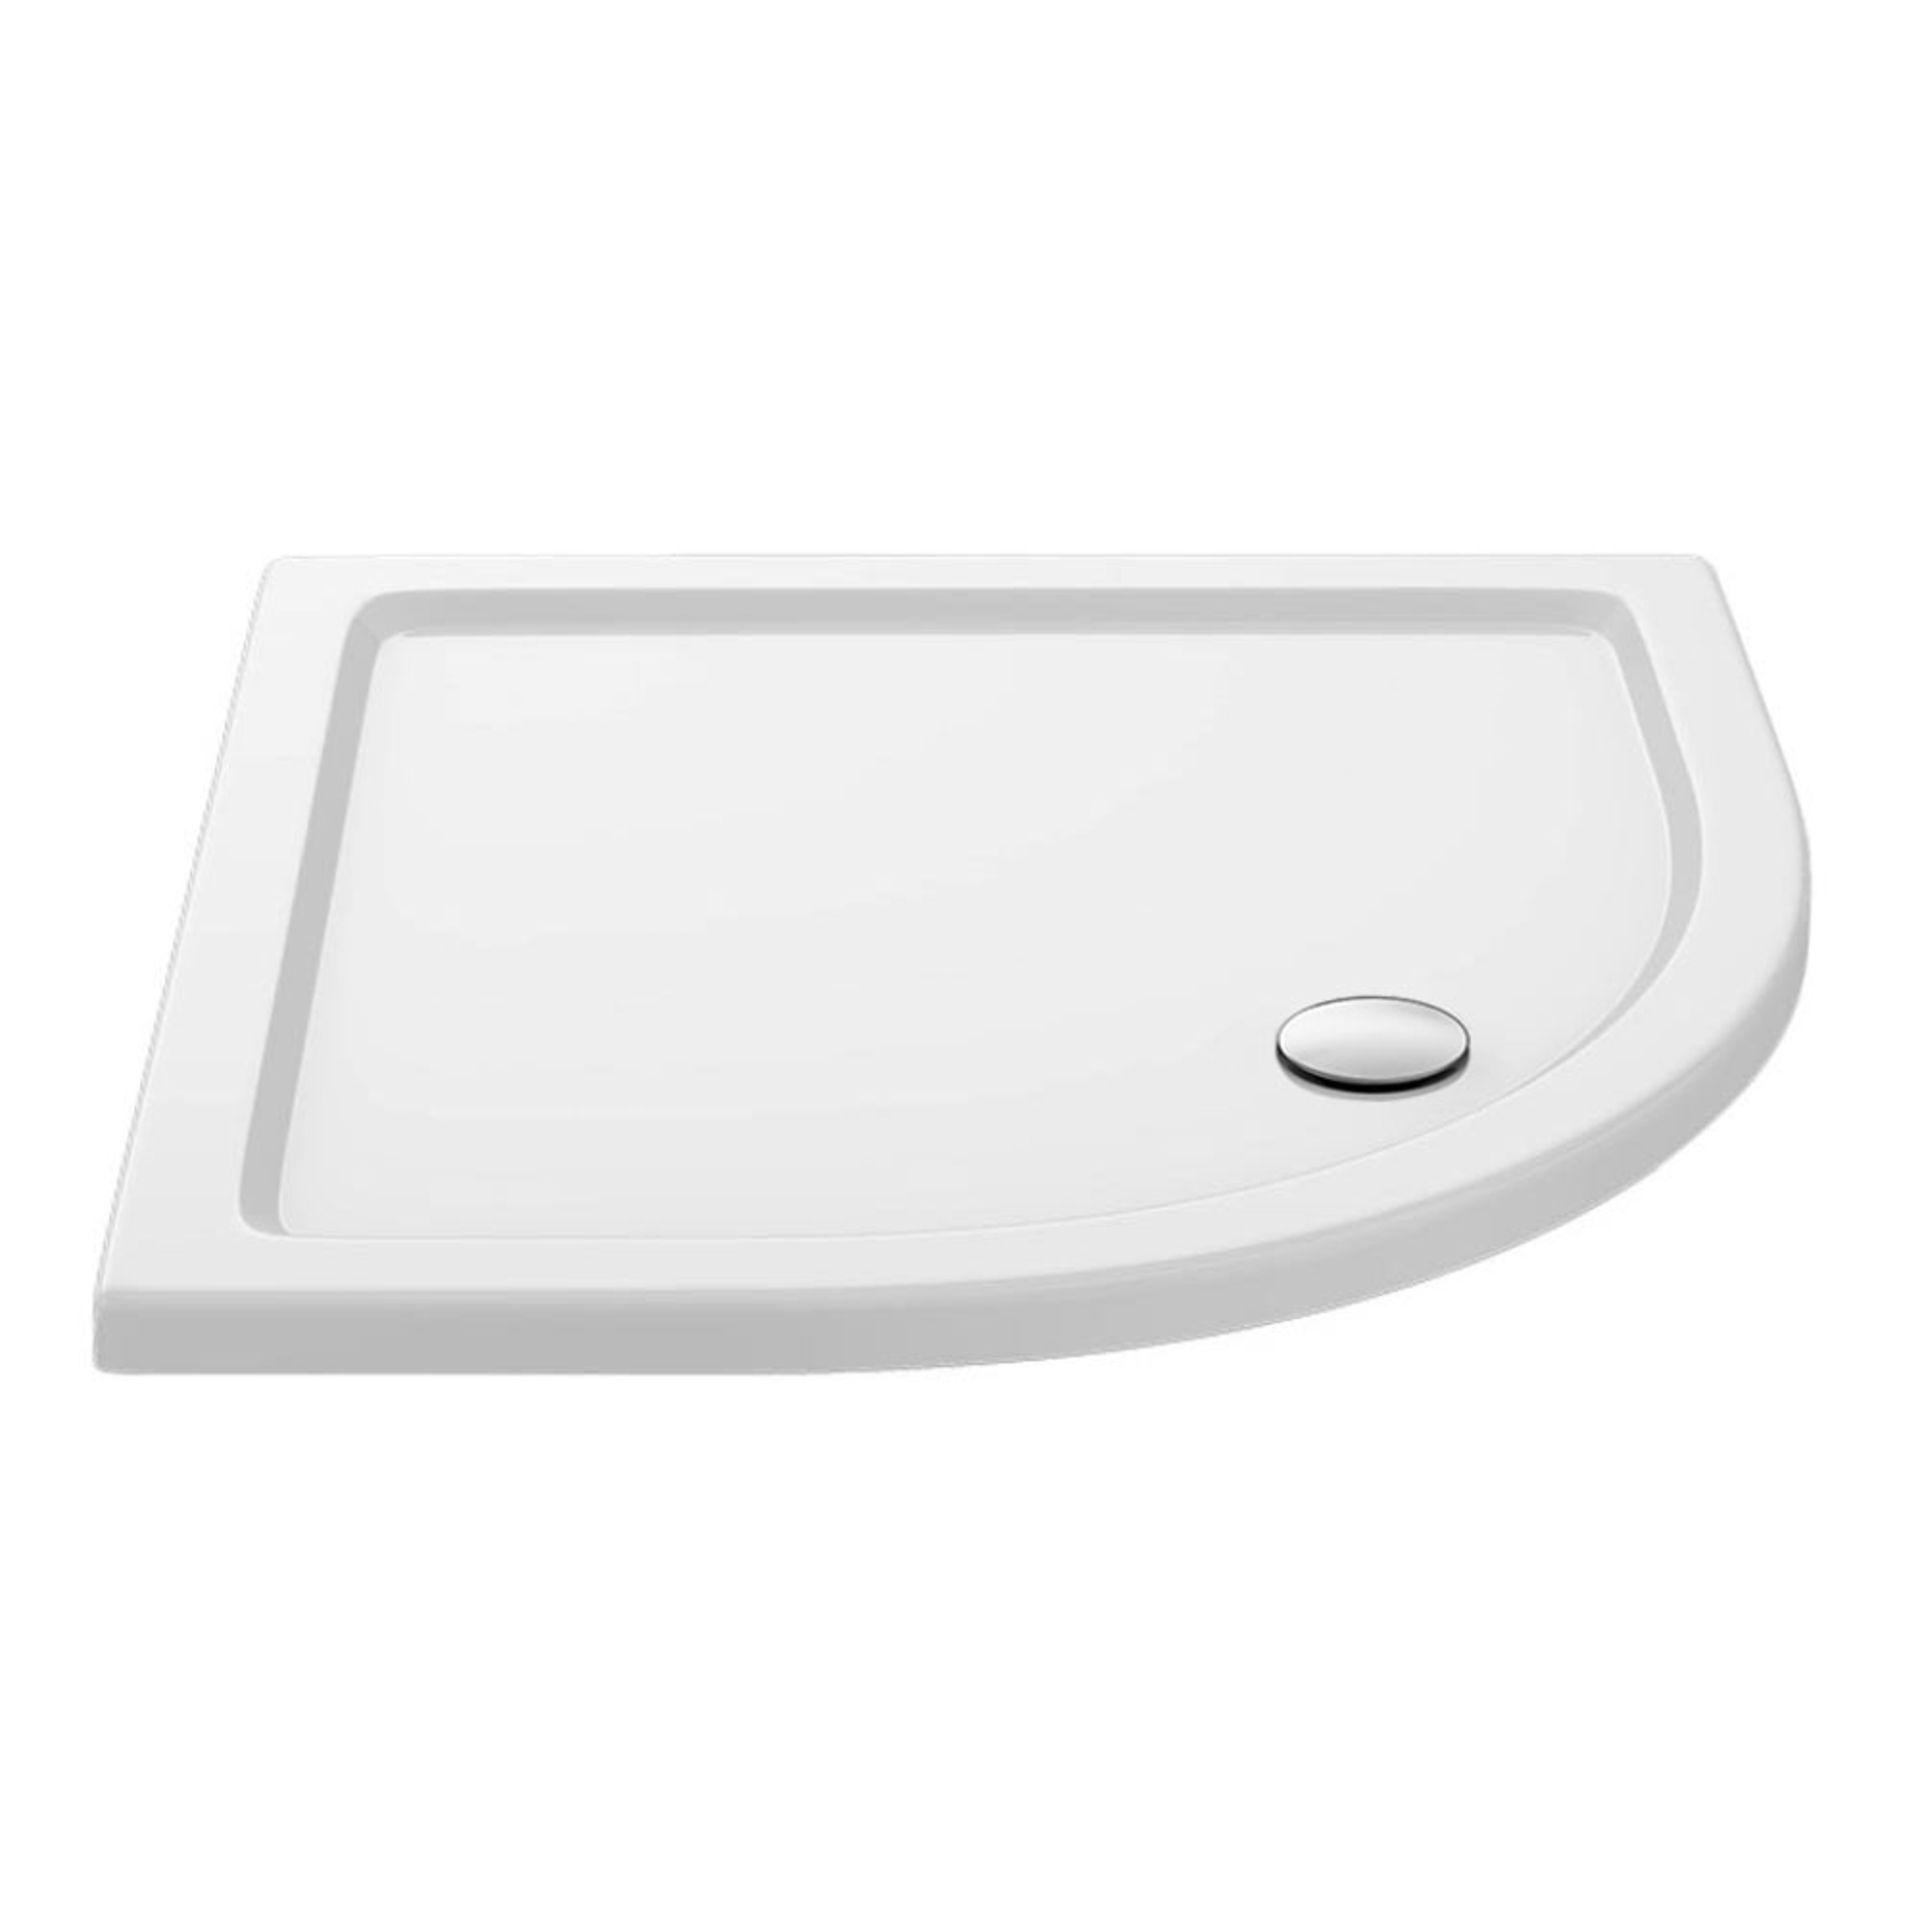 RRP £295. Stone Quadrant Shower Tray - 800 x 800 x 40mm. Appears New Unused In Factory Wrap. - Image 2 of 3